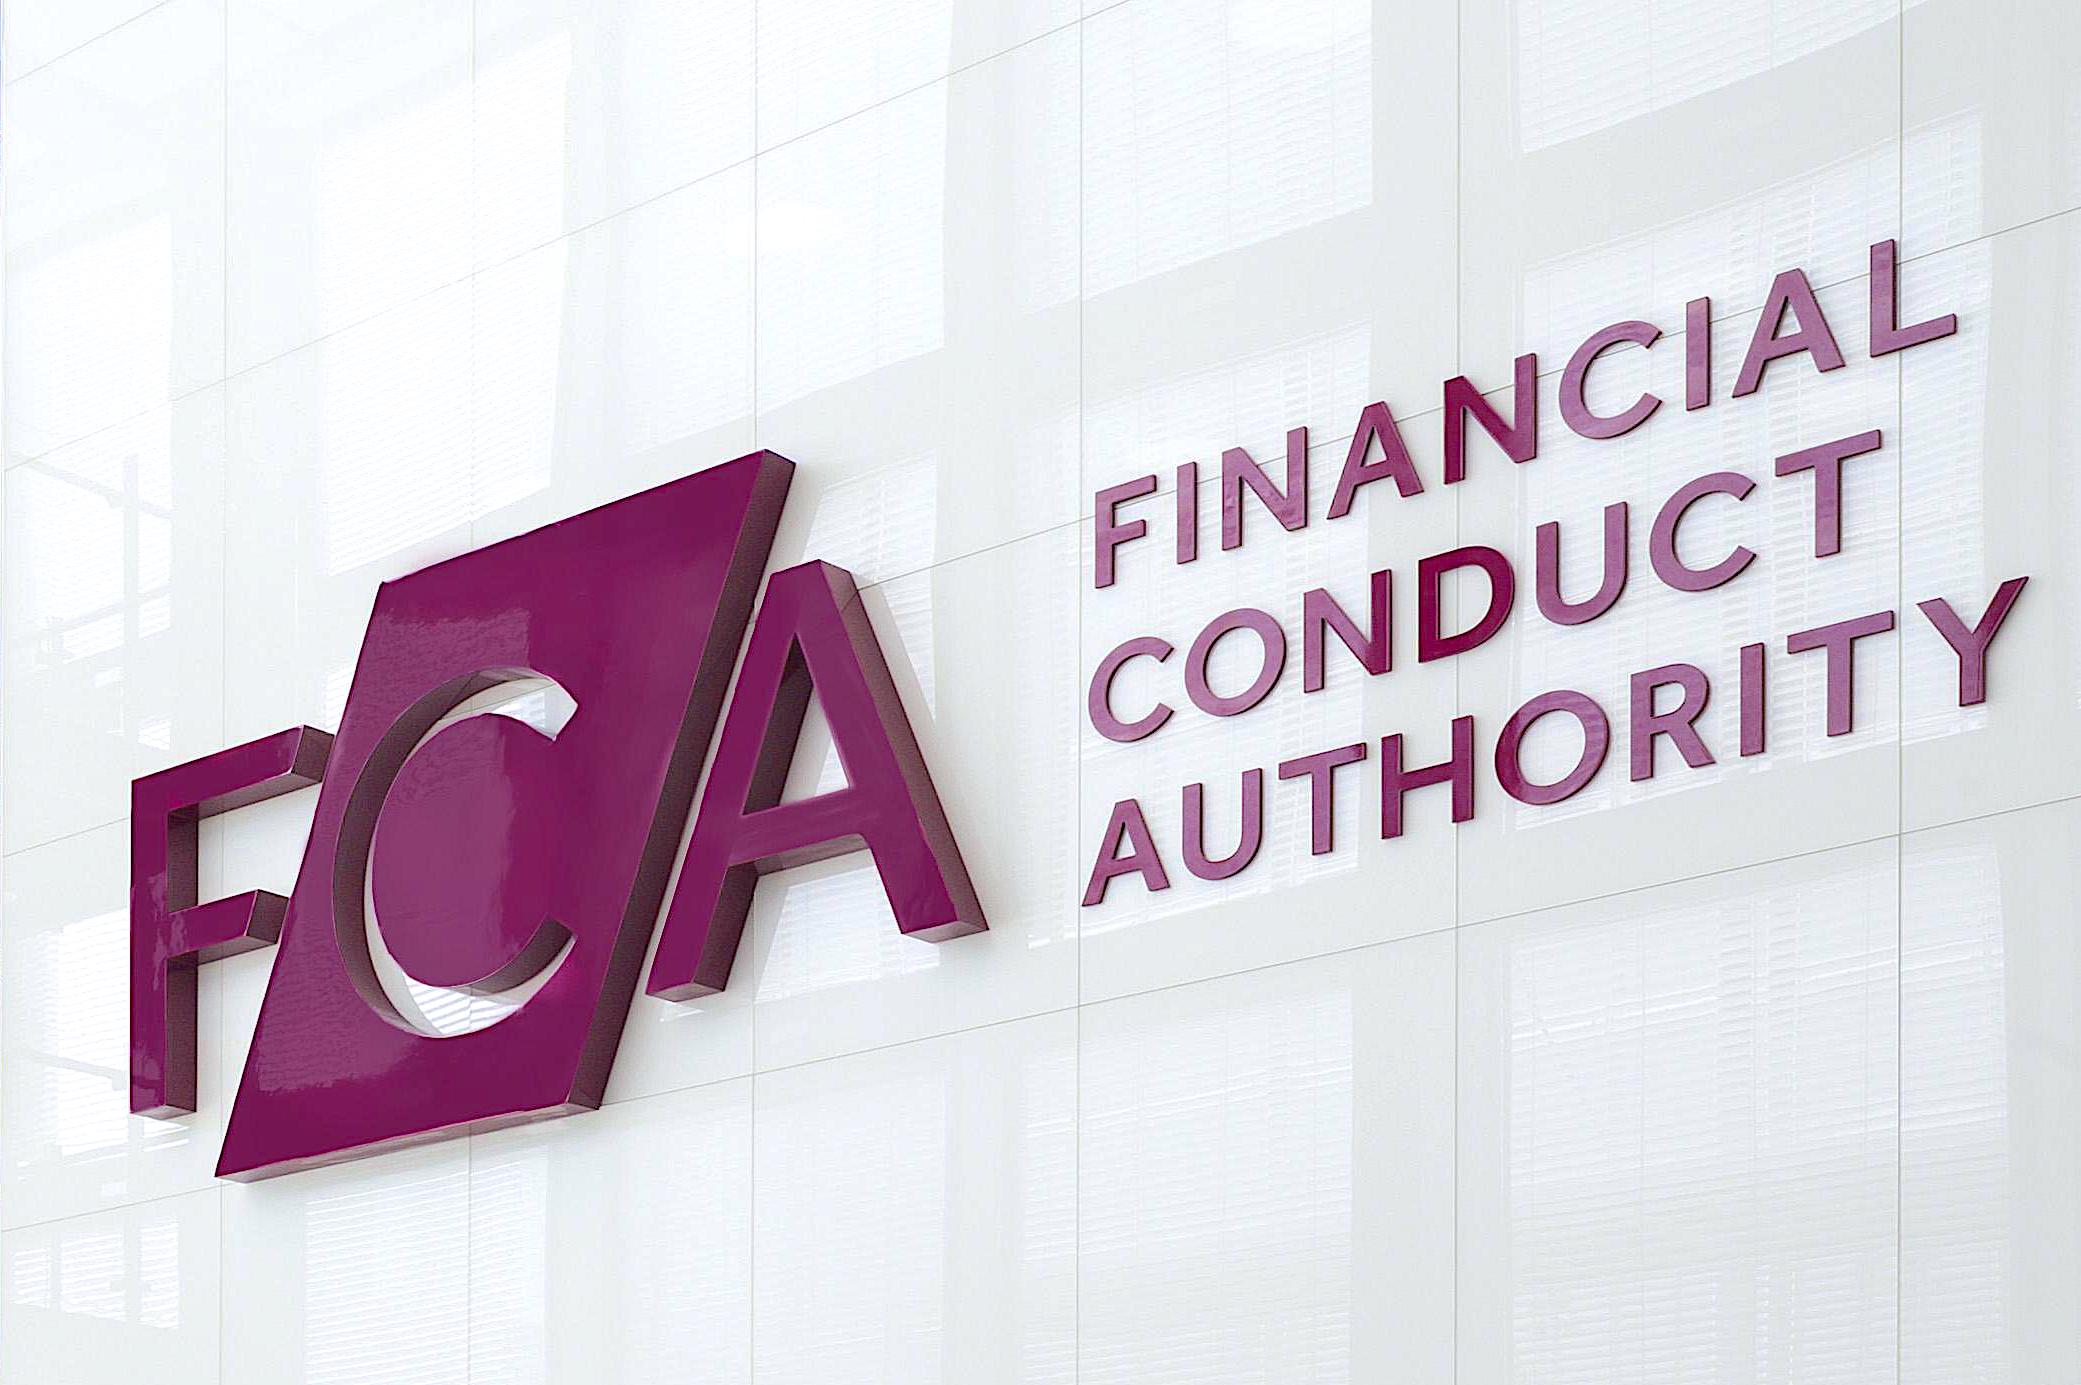 Britain's financial watchdog must act faster in fraud cases, says boss